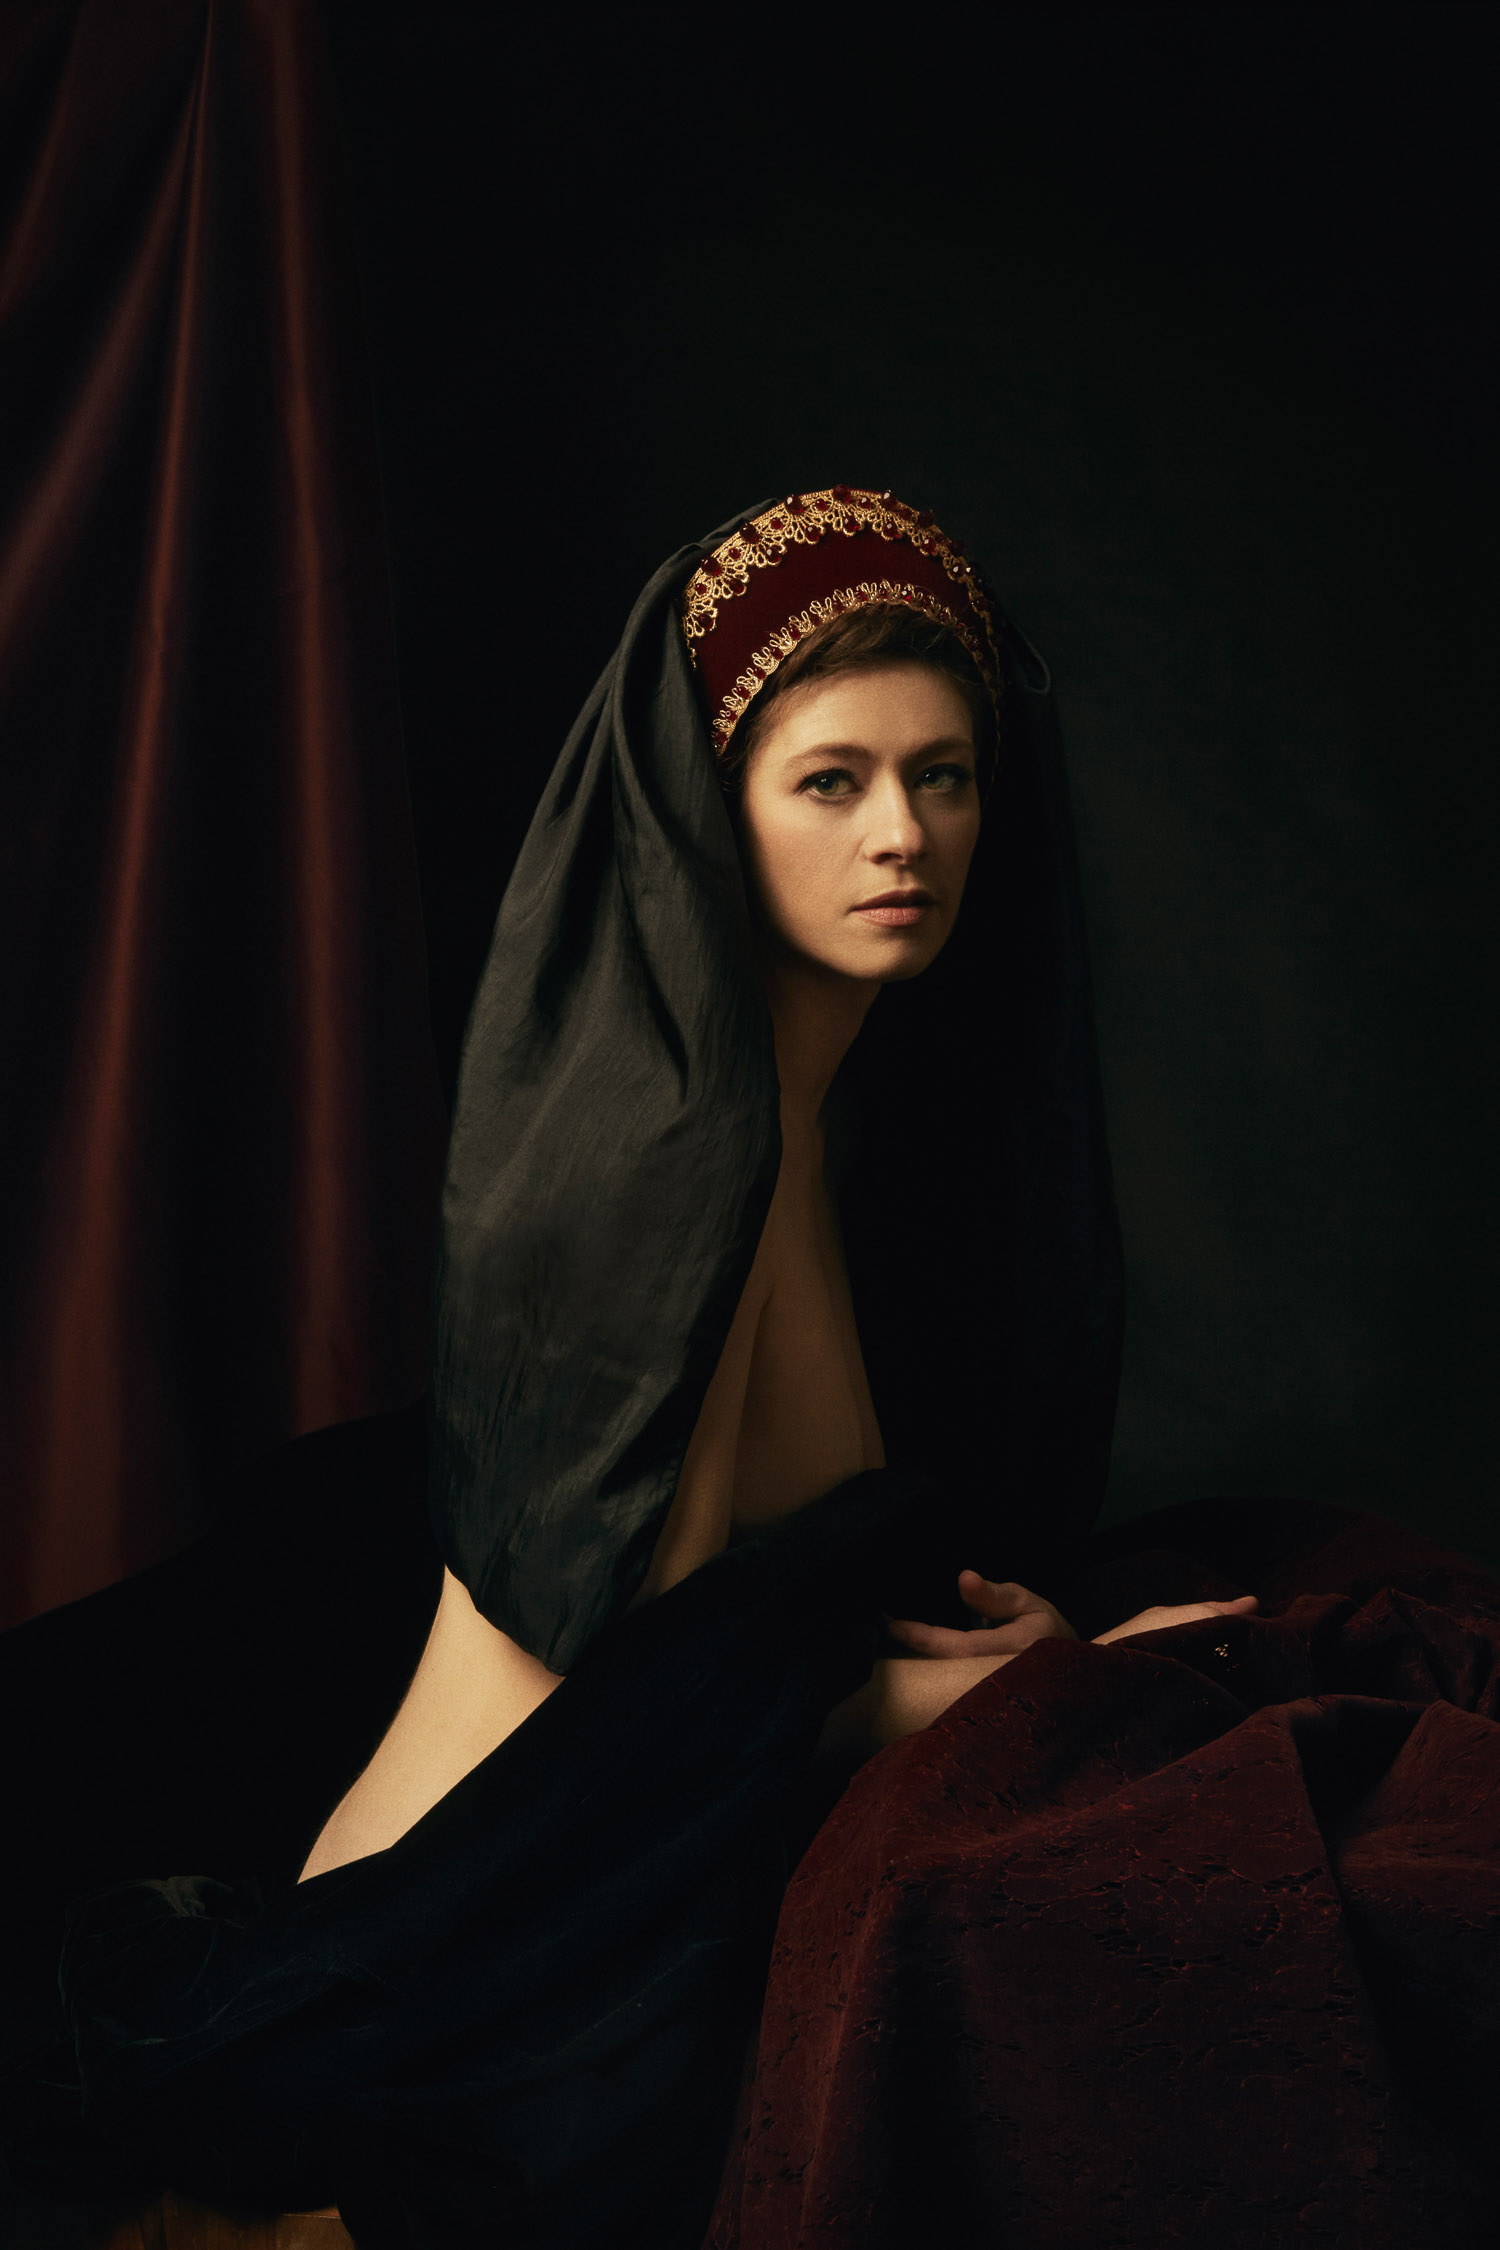 Renaissance themed photography of a woman in a French hood